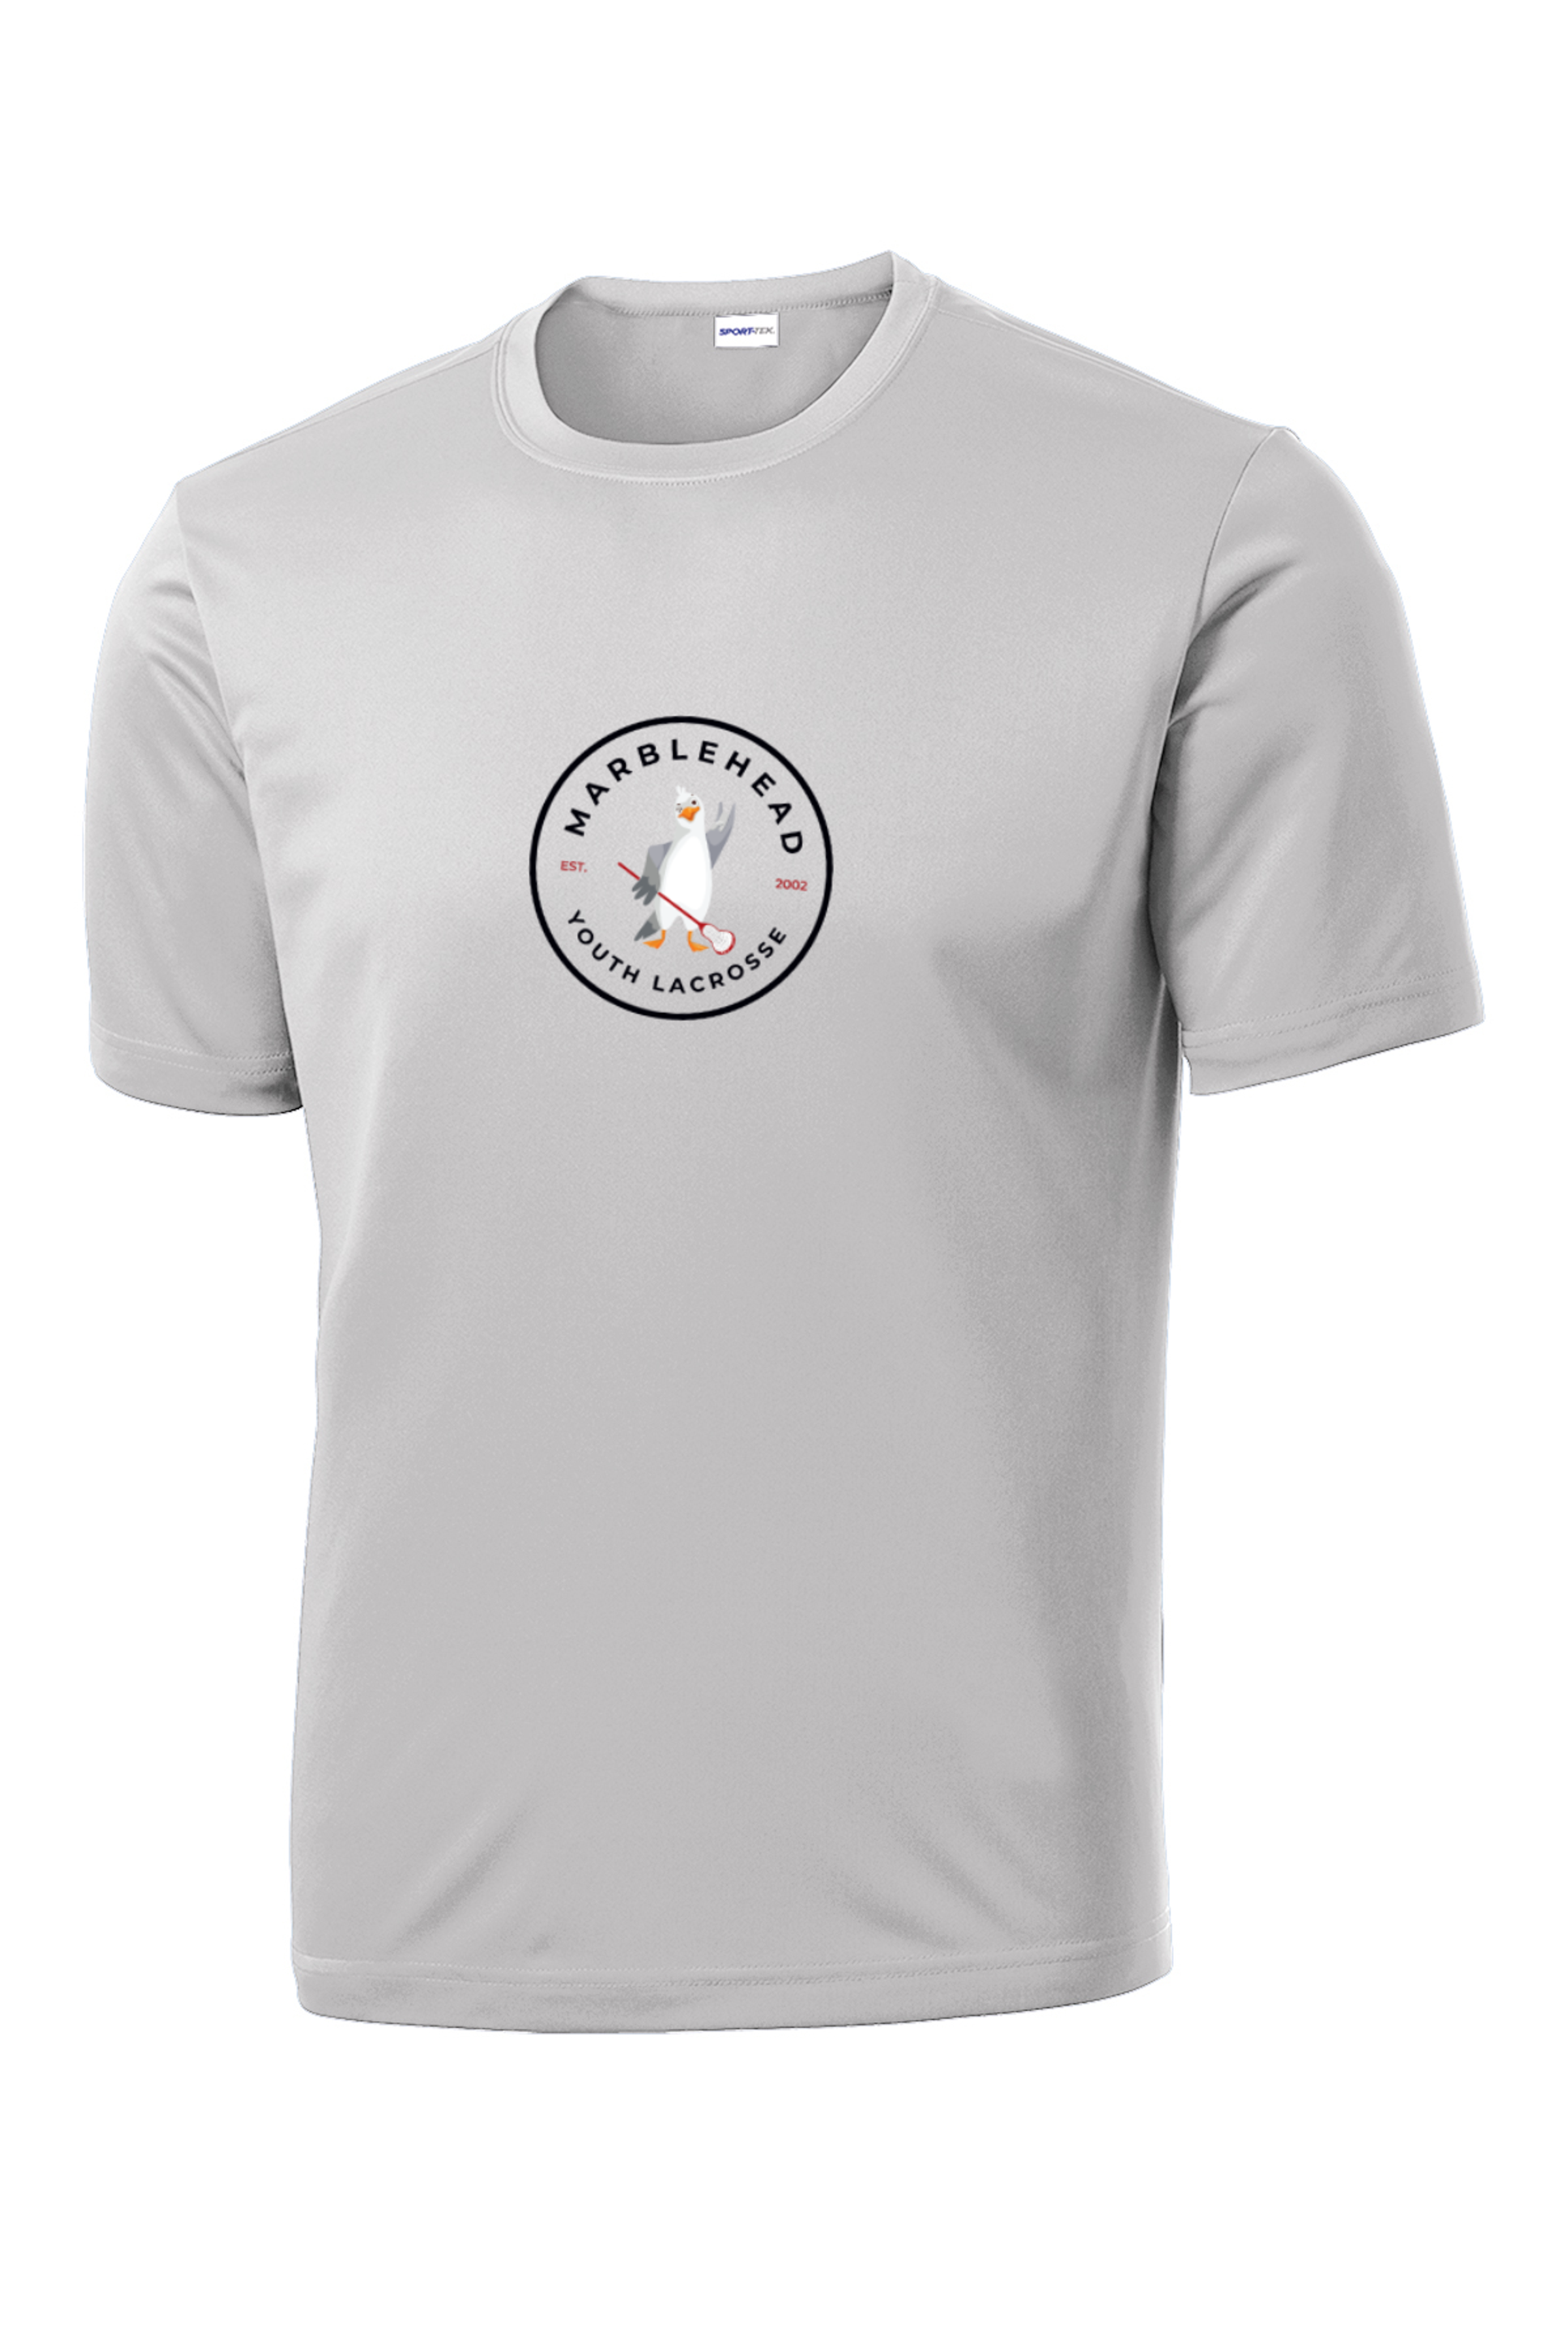 MHD Boys Youth New Lacrosse Short Sleeve Performance